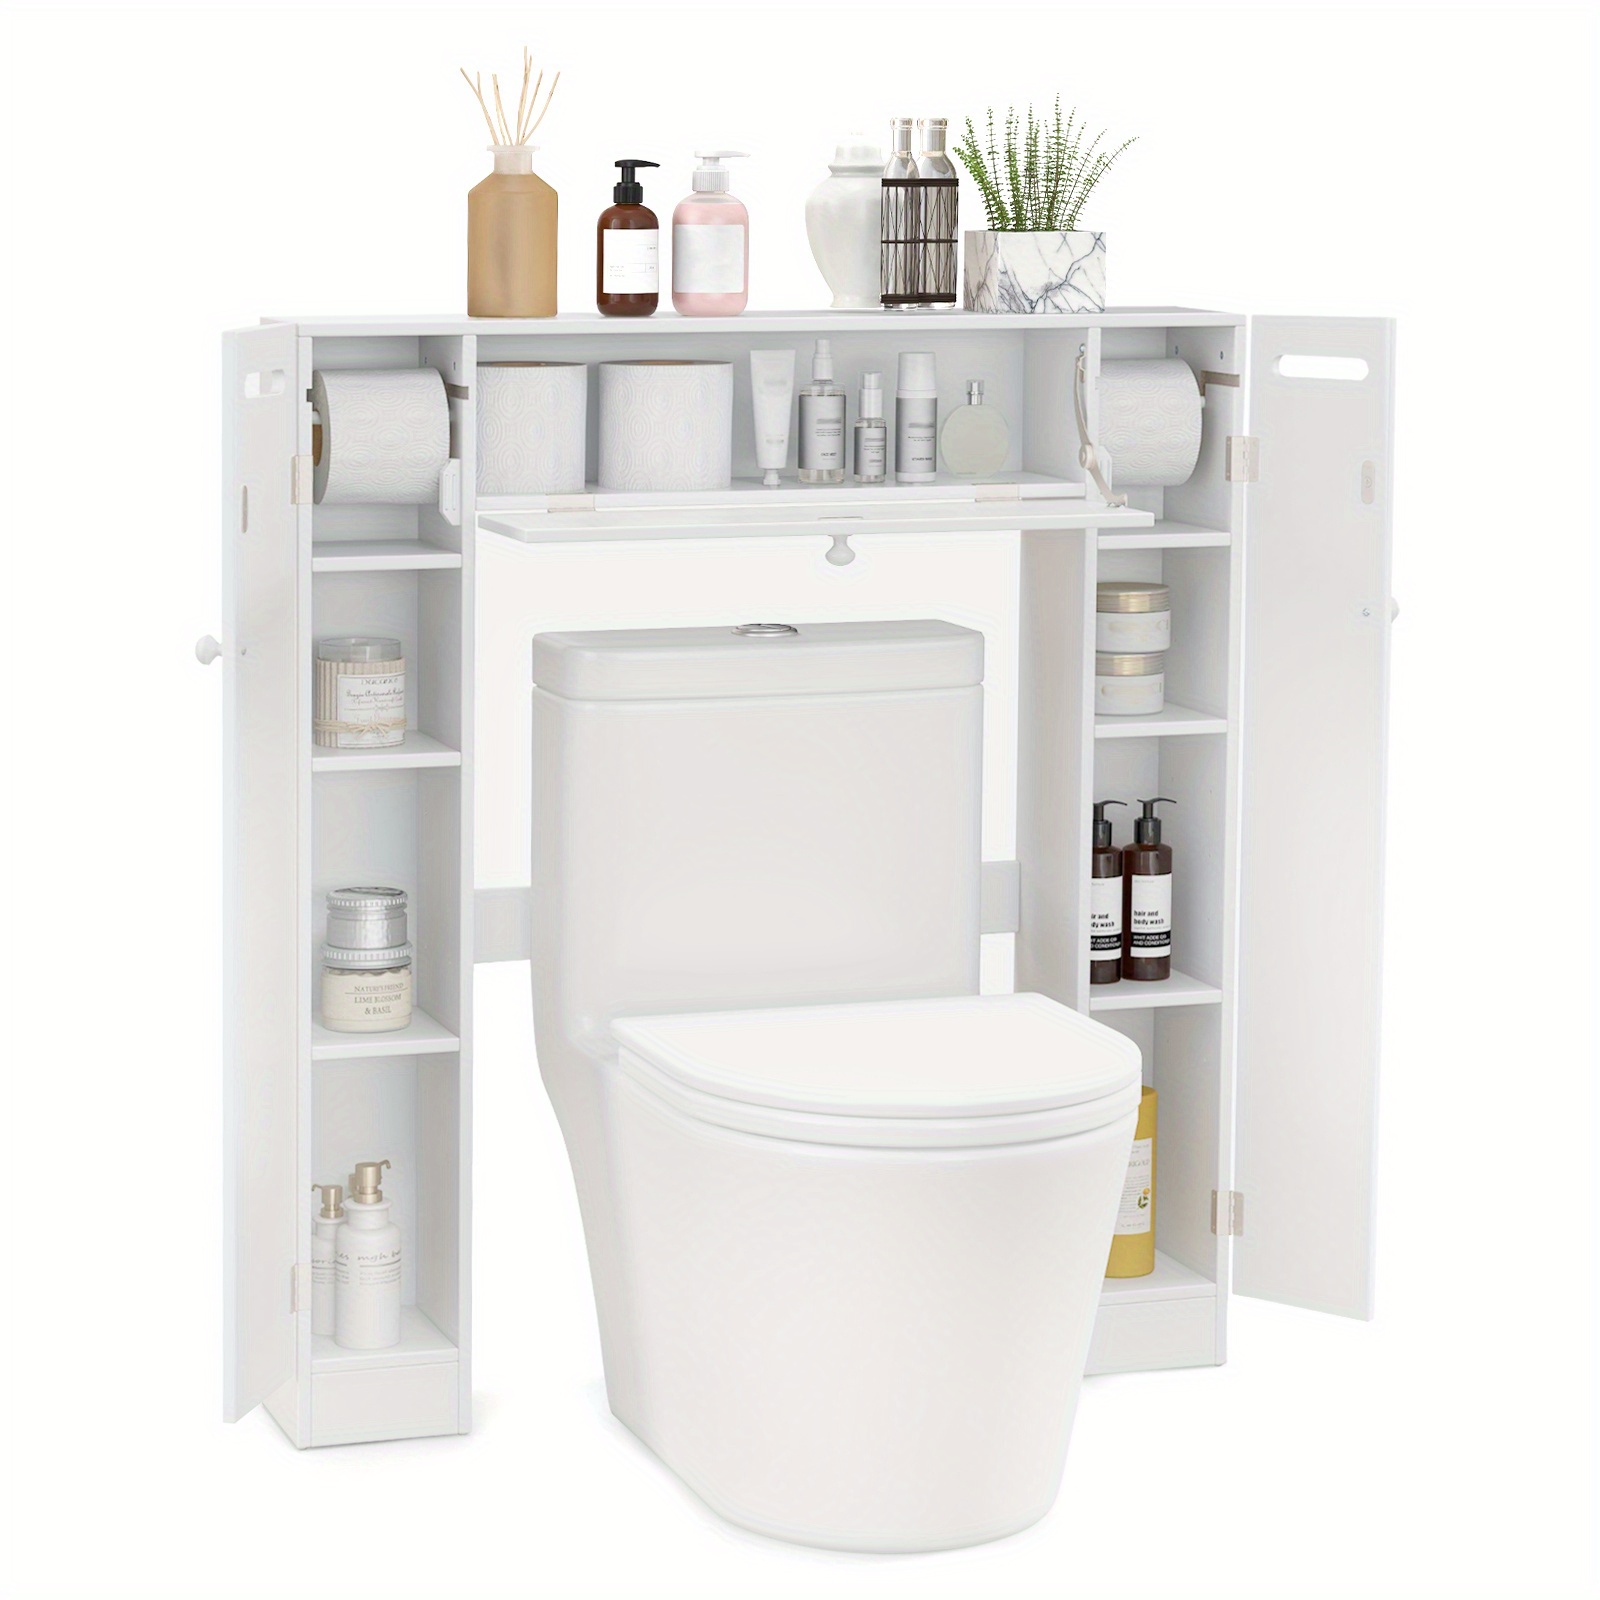 

Lifezeal Over The Toilet Bathroom Cabinet Free Standing Storage W/ Adjustable Shelves